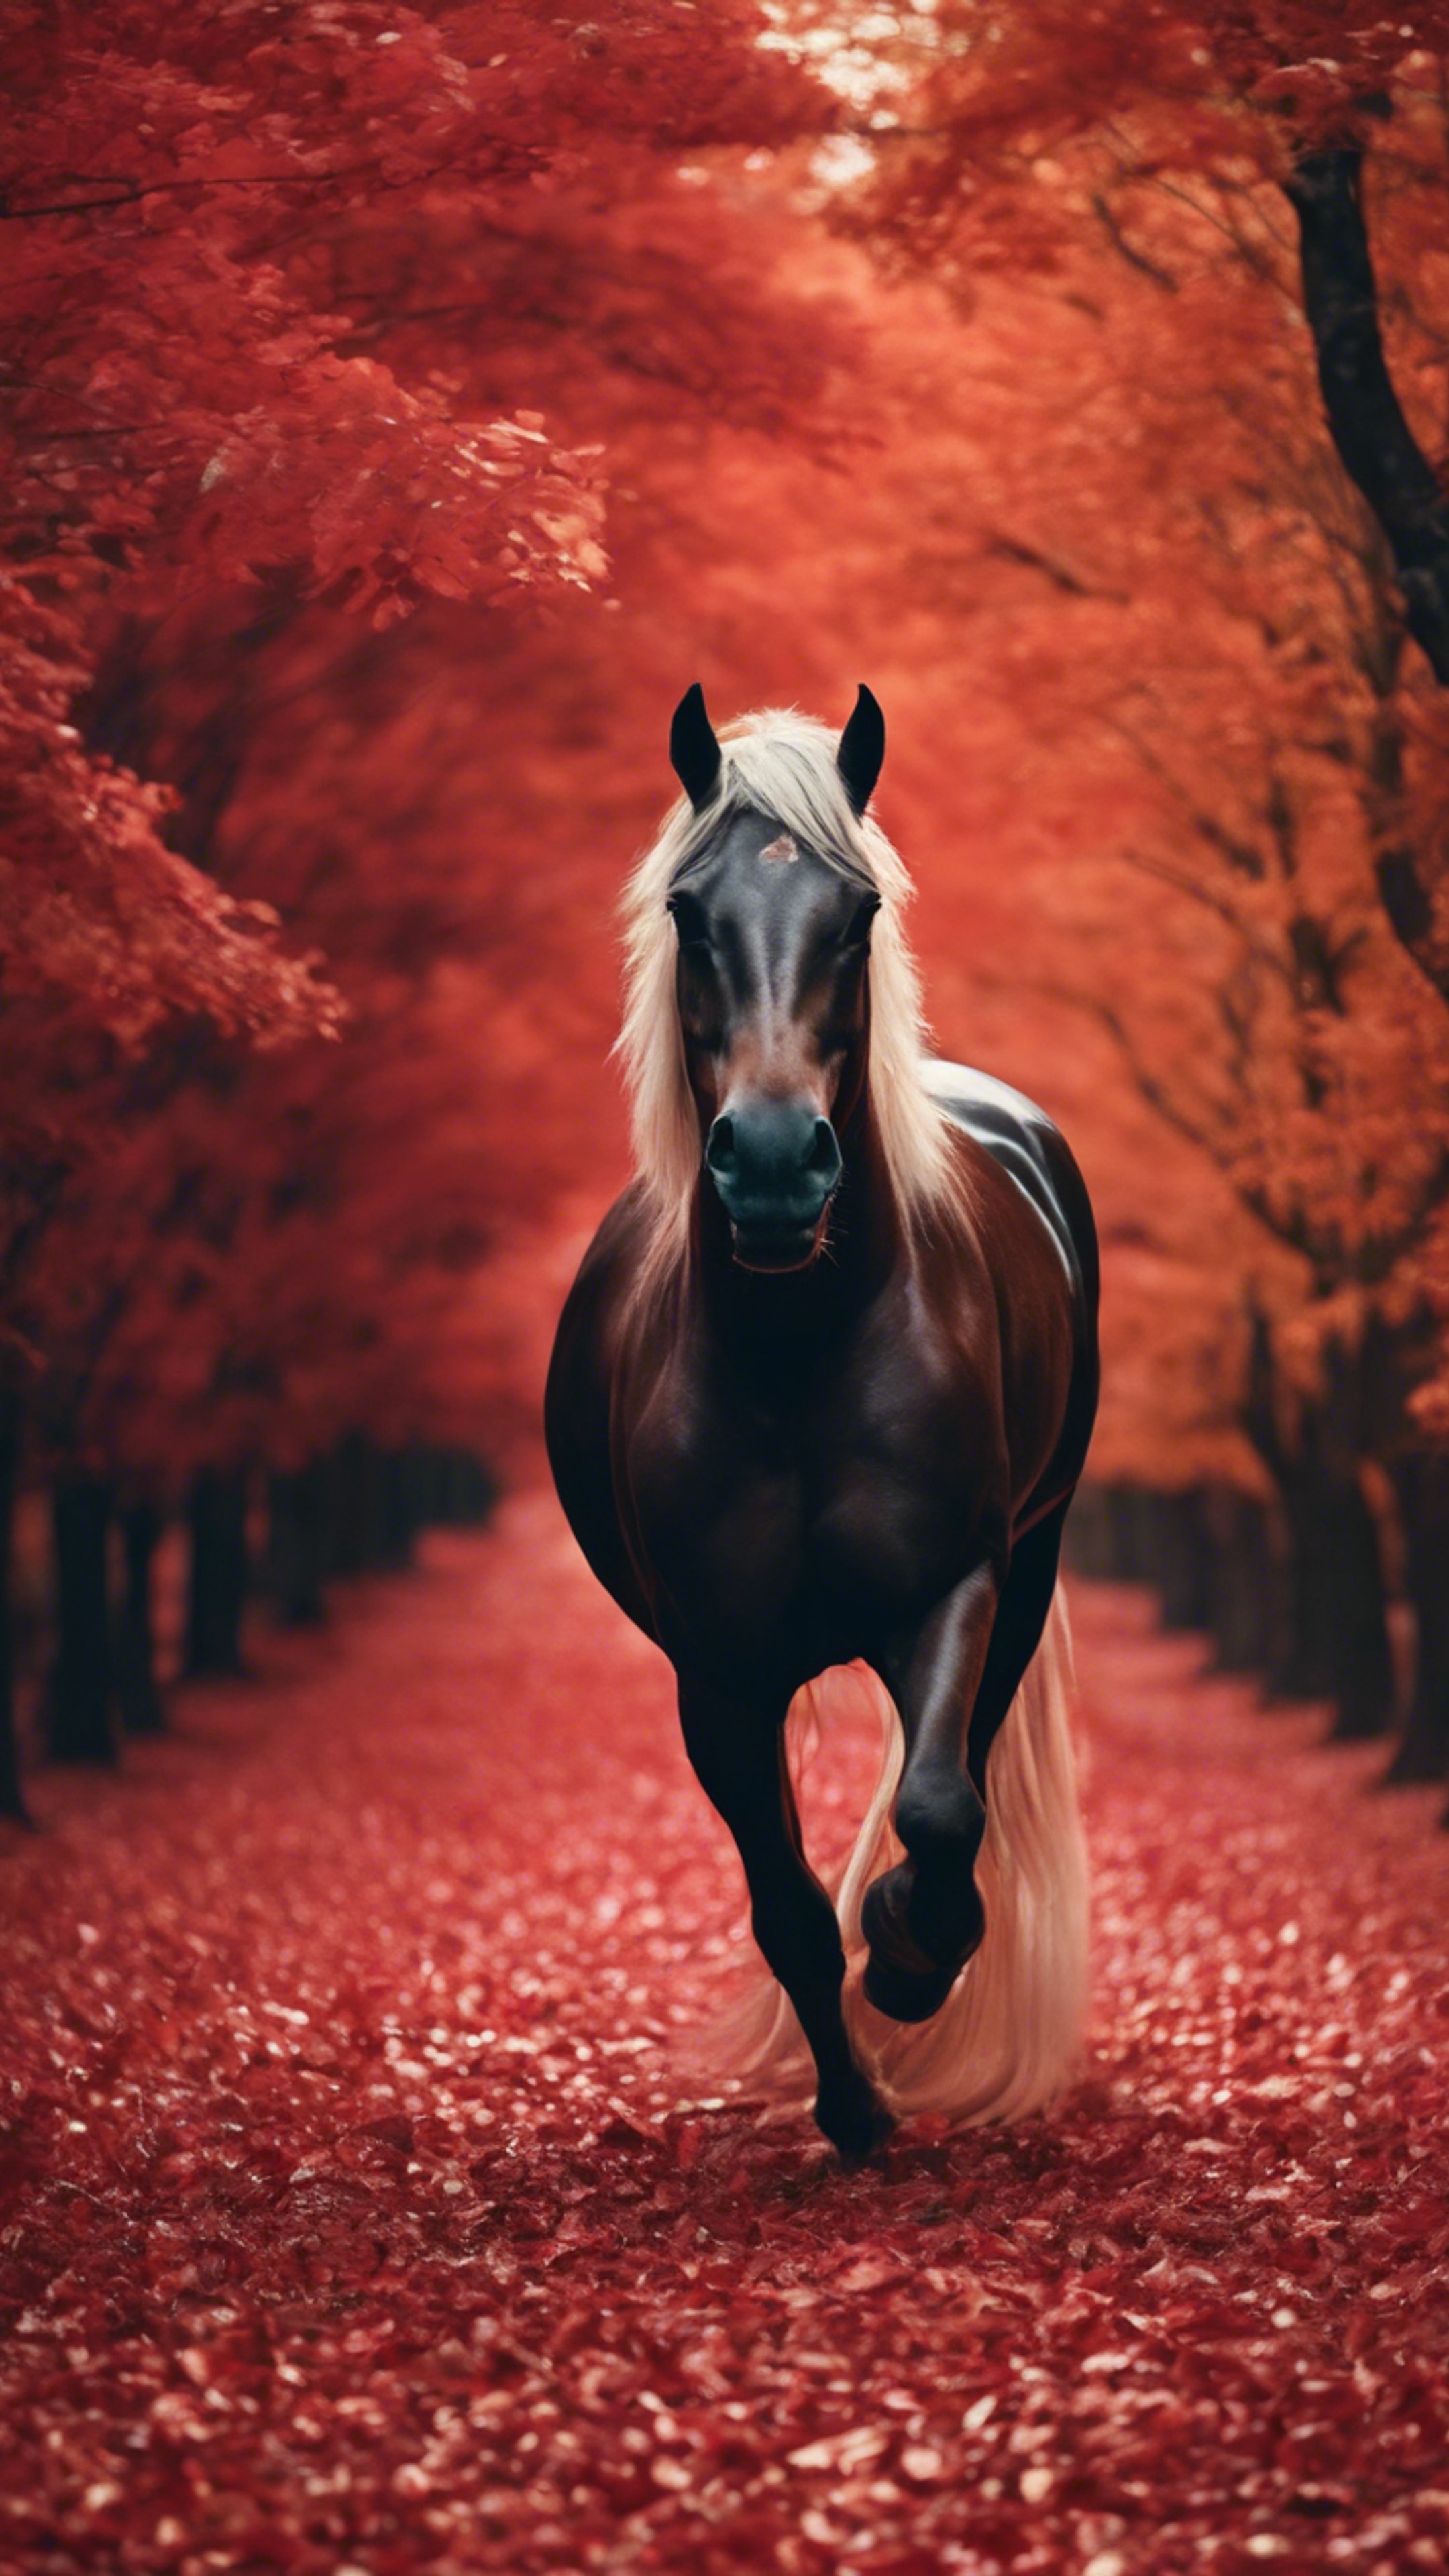 A dark horse with a golden mane running through a red leaf covered path in a Gothic forest.壁紙[60e637564c804e909cf4]